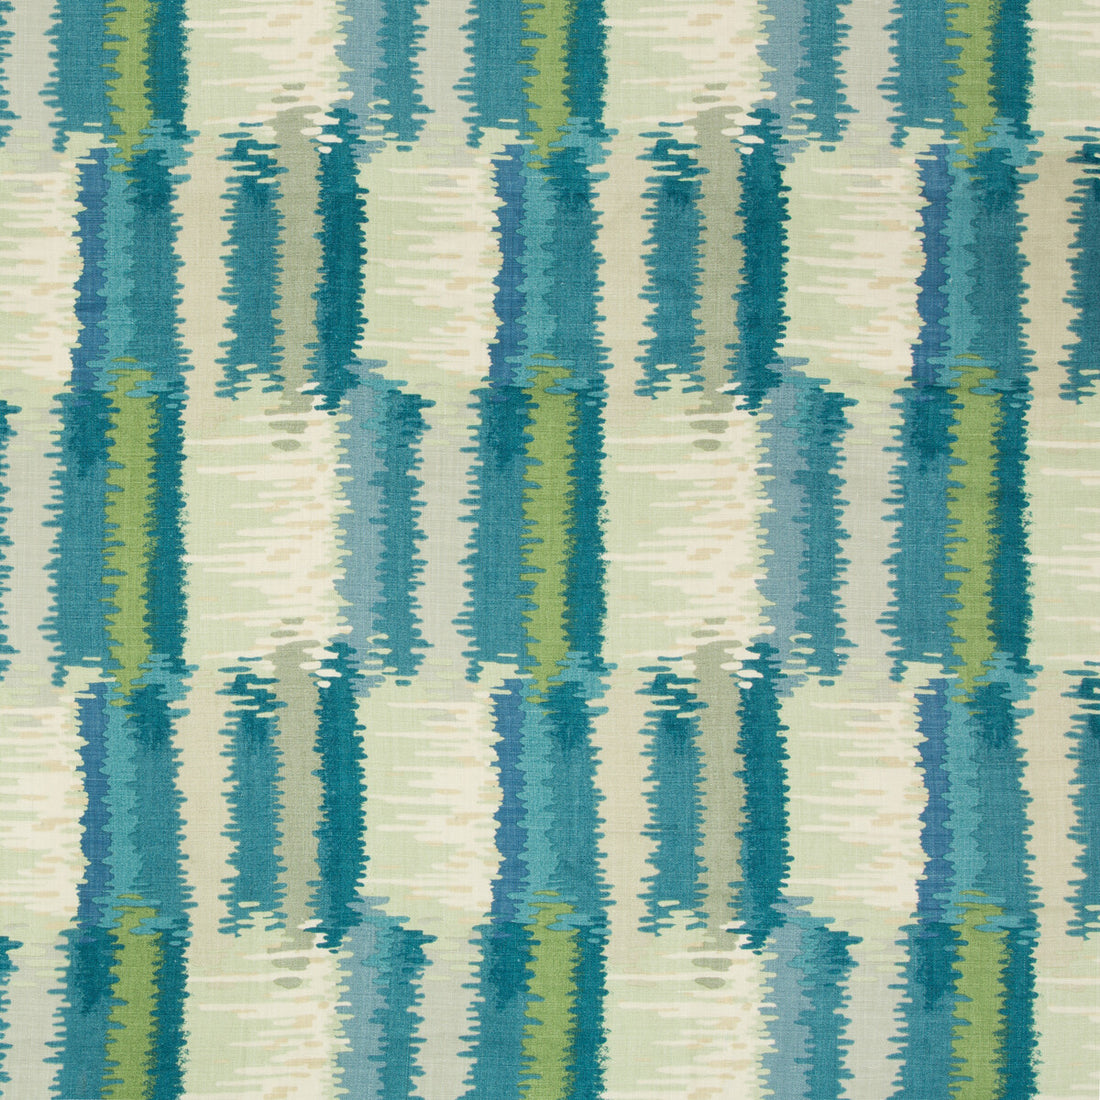 La Muse fabric in peacock color - pattern LA MUSE.53.0 - by Kravet Couture in the Modern Tailor collection